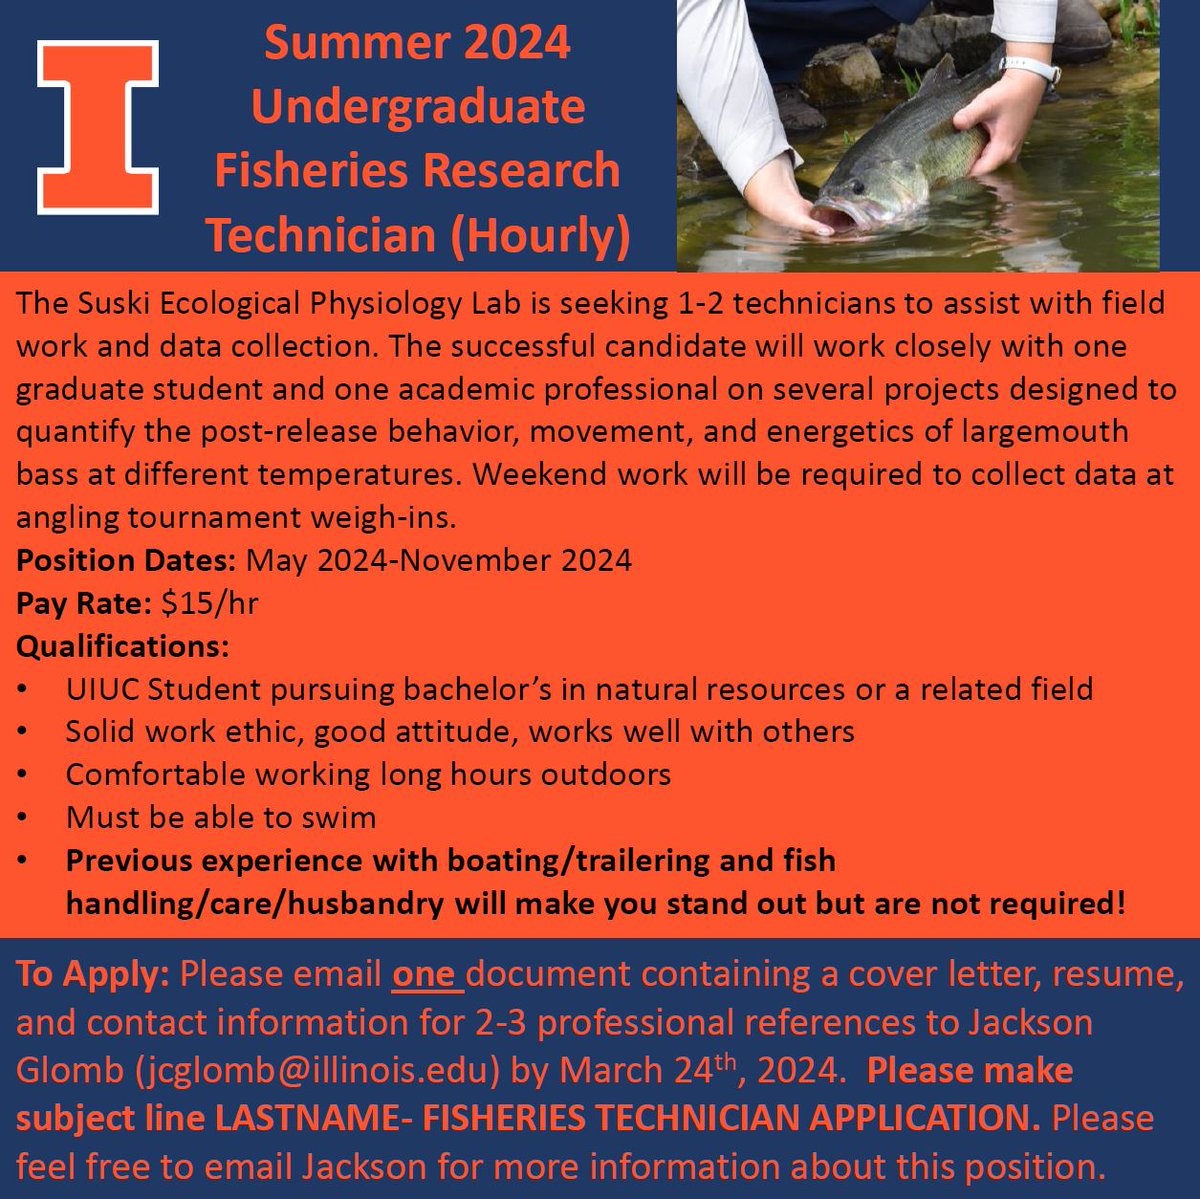 UIUC UNDERGRAD SUMMER POSITION ANNOUNCEMENT: Fisheries Research Technician. To apply email document containing cover letter, resume, and list of 2-3 professional references to jcglomb@illinois.edu by March 24, 2024.